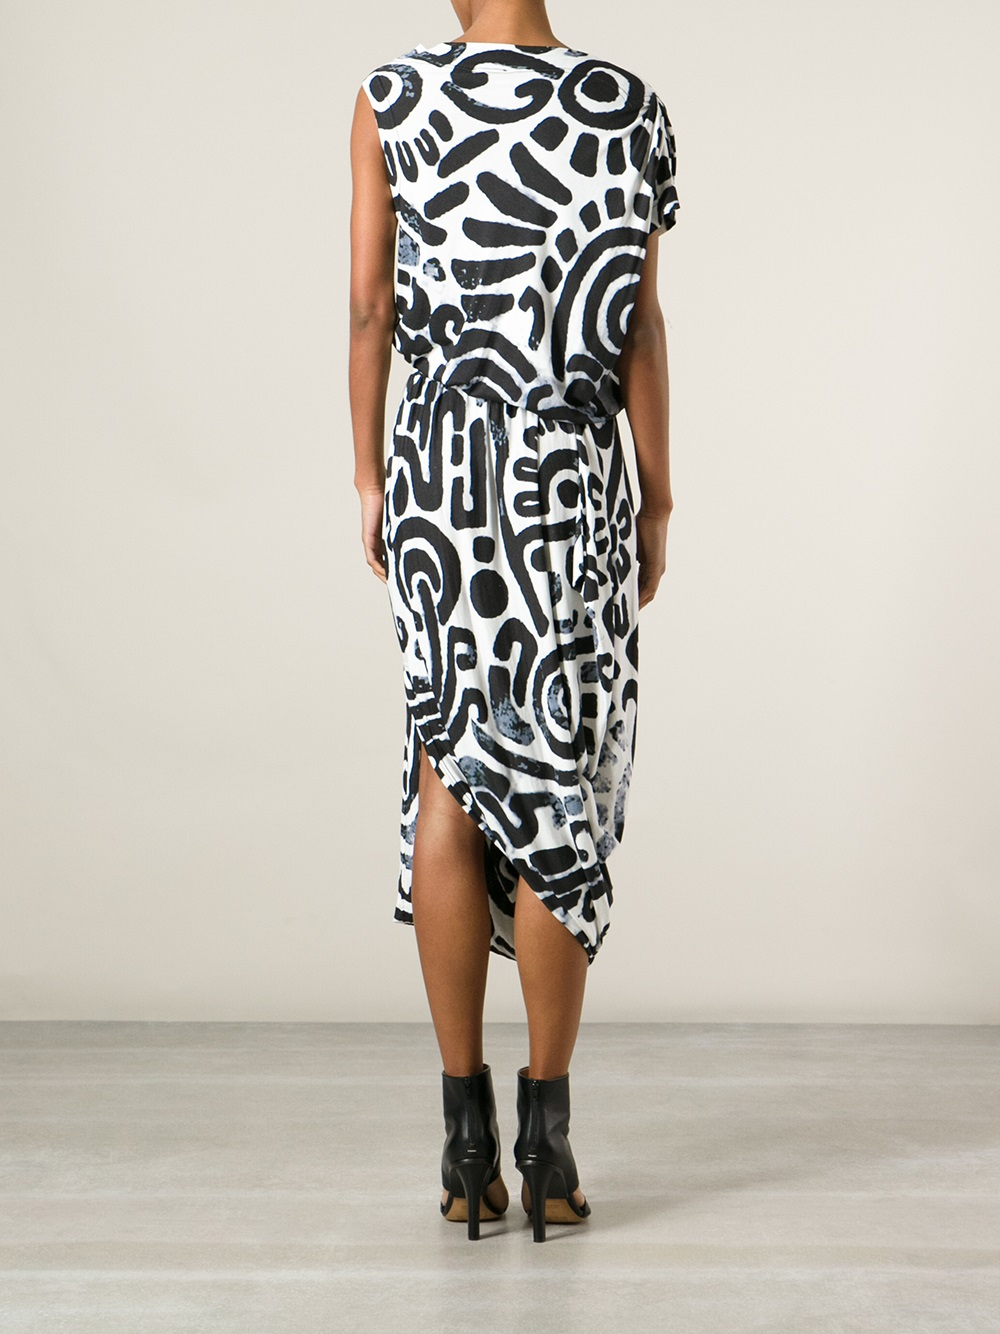 Vivienne Westwood Anglomania Aztec Print Dress in White (Black) - Lyst